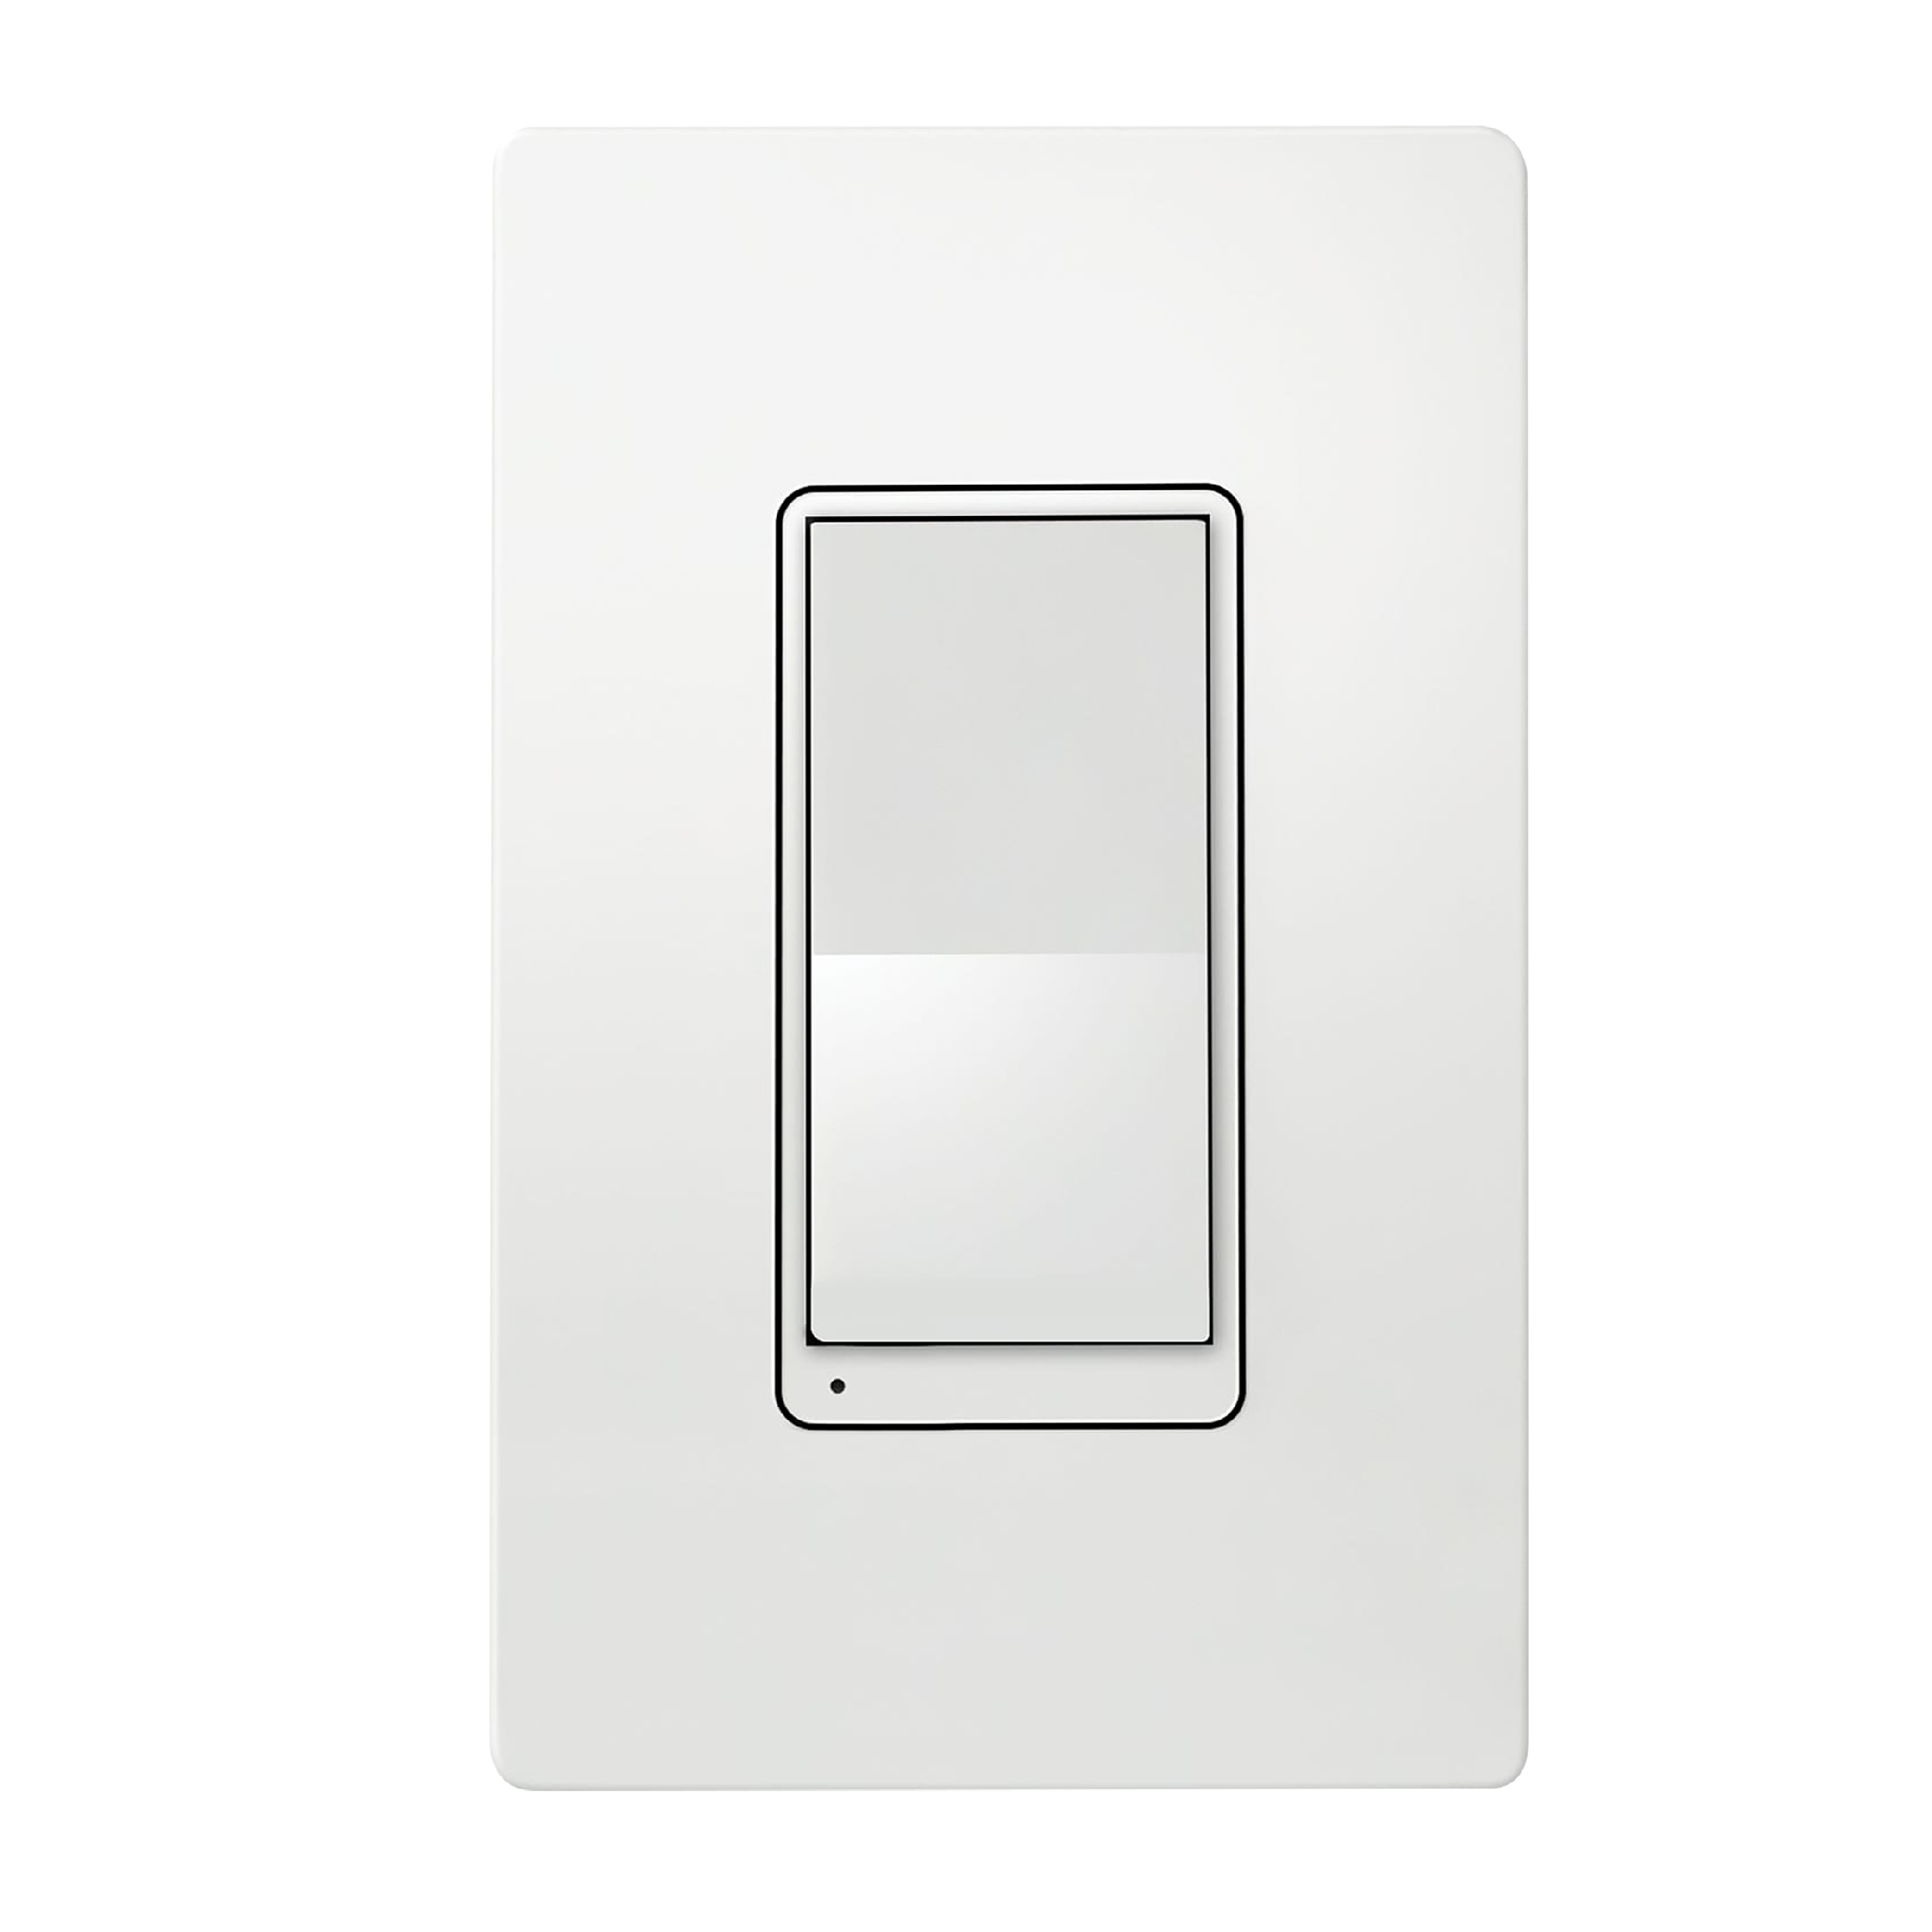 In-Wall 3-Way/4-Way Add-On Wi-Fi Dimmer Switch